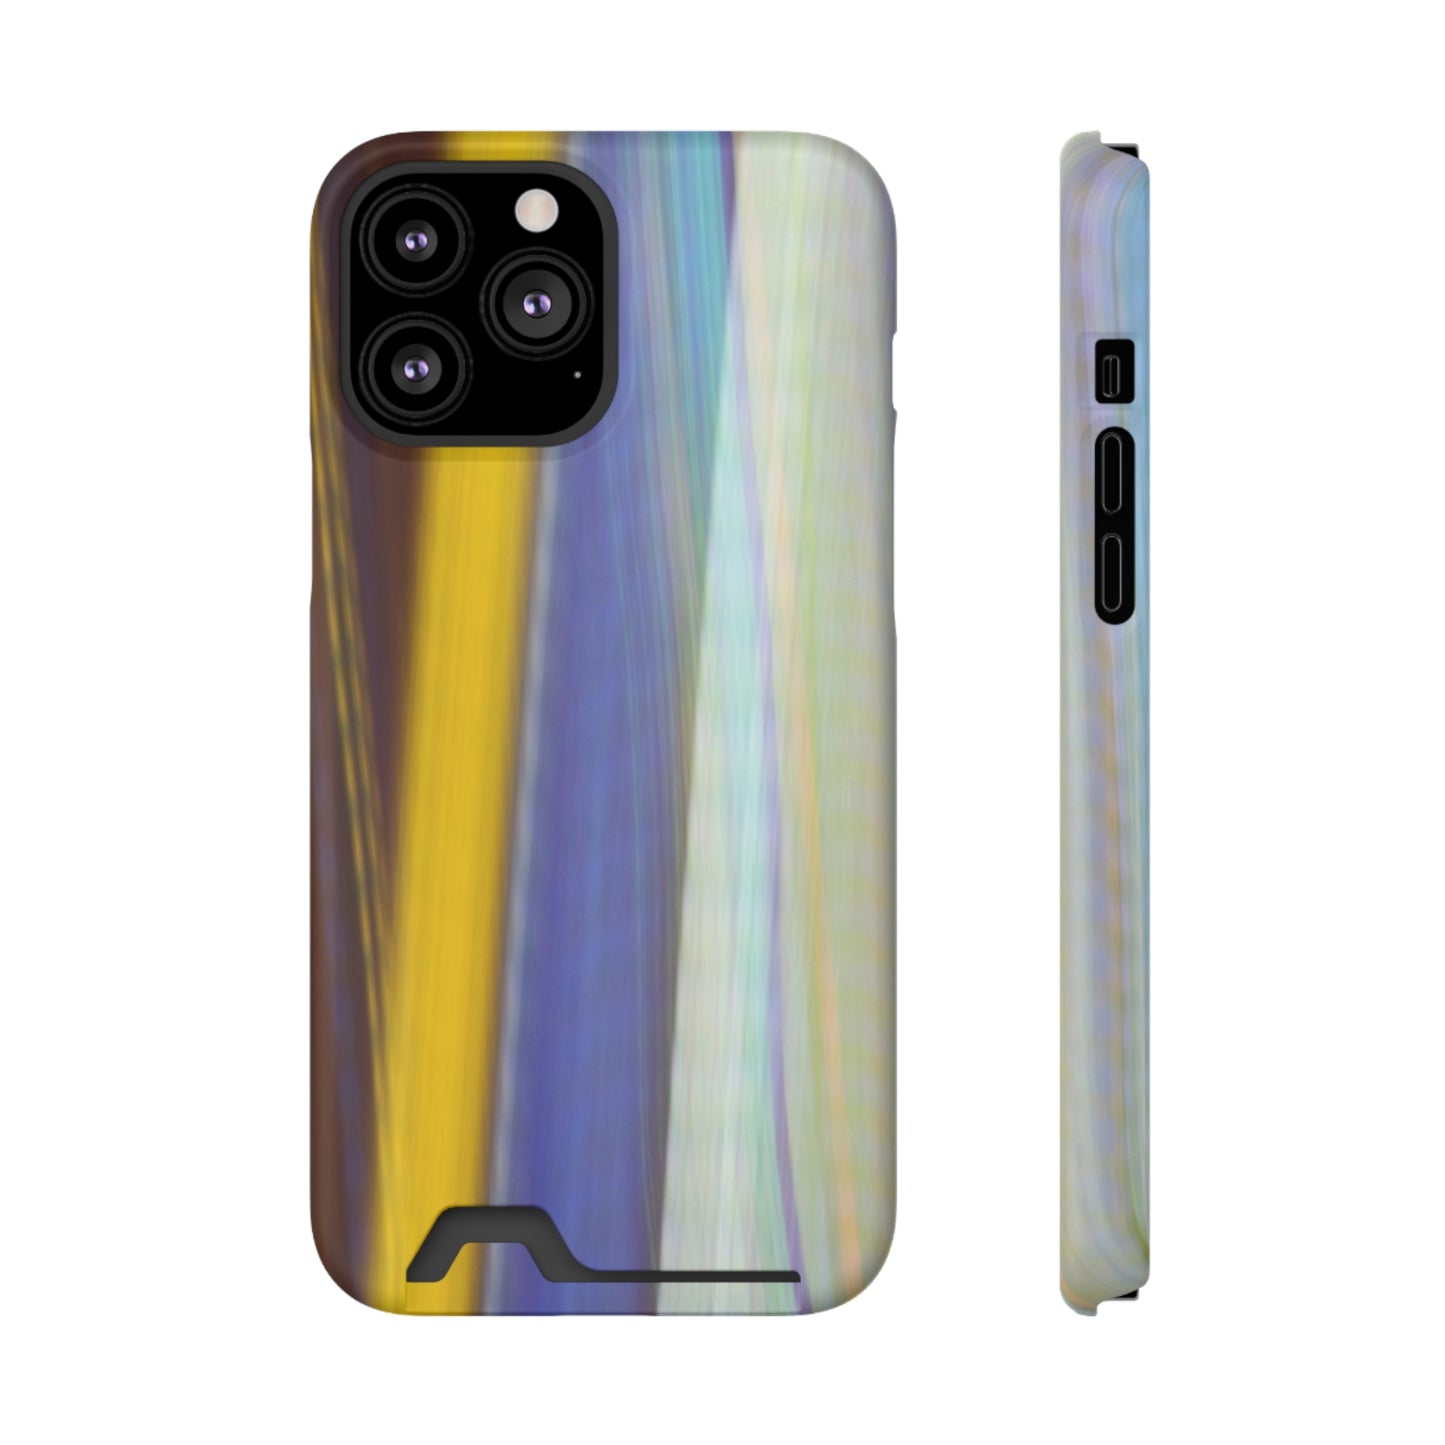 stripestained one Phone Case With Card Holder shons light painting